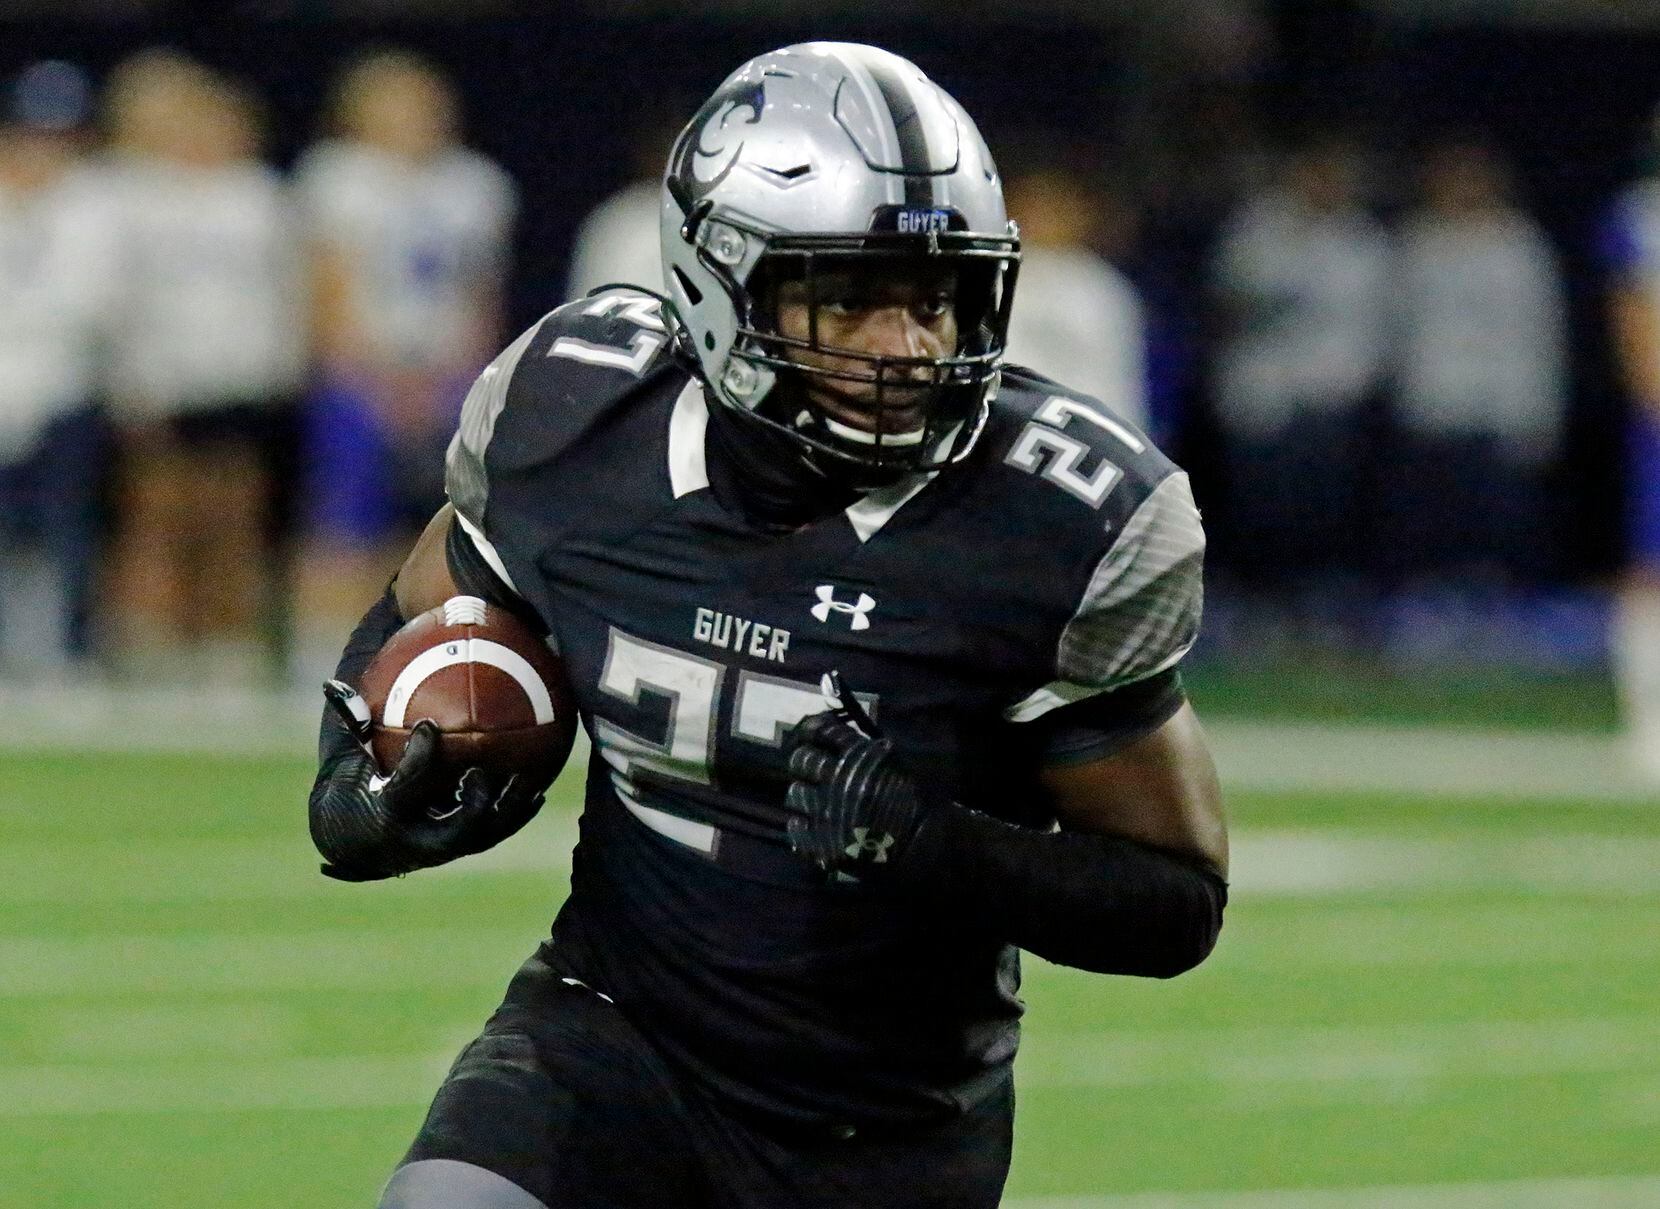 Guyer High School running back Byron Phillips Jr. (27) takes off for the end zone after making a catch in the backfield during the first half as Denton Guyer High School played Trophy Club Byron Nelson High School in a Class 6A Division II Region I semifinal football game at The Ford Center in Frisco on Saturday, November 27, 2021. (Stewart F. House/Special Contributor)